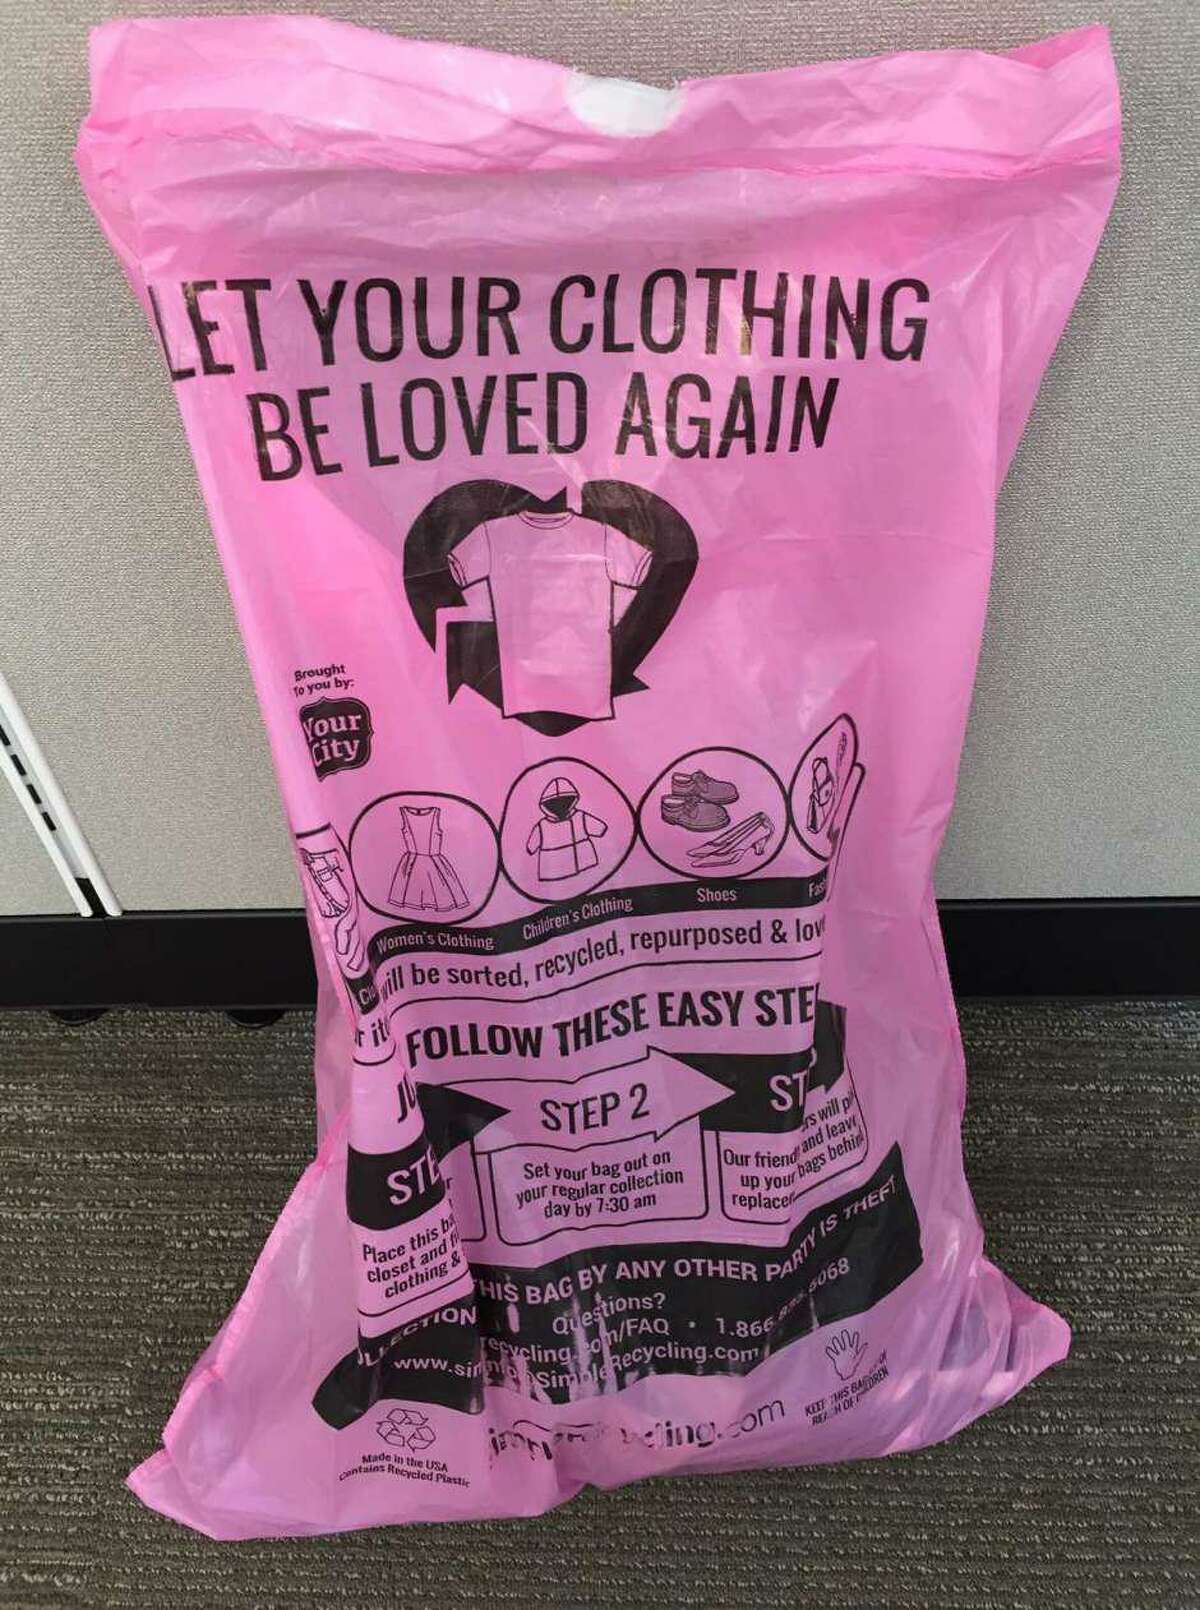 Stamford residents can recycle gently used clothing by putting it in provided pink plastic bags and leaving them next to their recycling bins.